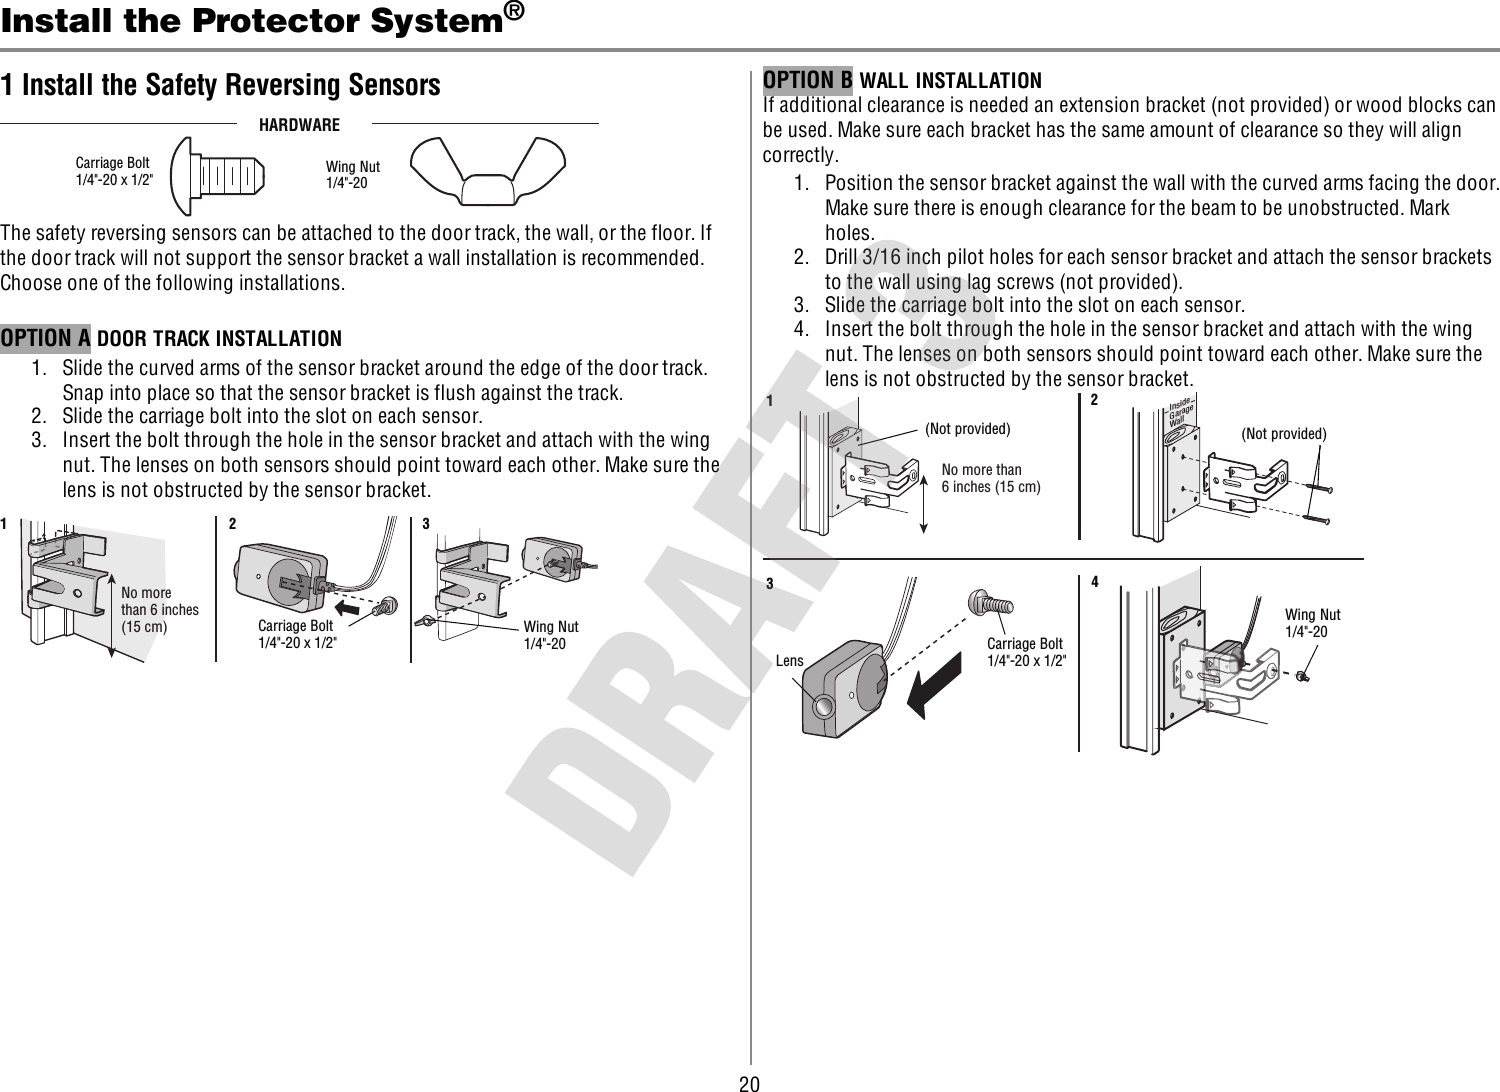 20Install the Protector System®1 Install the Safety Reversing SensorsHARDWARECarriage Bolt1/4&quot;-20 x 1/2&quot;  Wing Nut1/4&quot;-20 The safety reversing sensors can be attached to the door track, the wall, or the floor. Ifthe door track will not support the sensor bracket a wall installation is recommended.Choose one of the following installations.OPTION A DOOR TRACK INSTALLATION1. Slide the curved arms of the sensor bracket around the edge of the door track.Snap into place so that the sensor bracket is flush against the track.2. Slide the carriage bolt into the slot on each sensor.3. Insert the bolt through the hole in the sensor bracket and attach with the wingnut. The lenses on both sensors should point toward each other. Make sure thelens is not obstructed by the sensor bracket.No morethan 6 inches(15 cm) Carriage Bolt1/4&quot;-20 x 1/2&quot; Wing Nut1/4&quot;-20 123OPTION B WALLINSTALLATIONIf additional clearance is needed an extension bracket (not provided) or wood blocks canbe used. Make sure each bracket has the same amount of clearance so they will aligncorrectly.1. Position the sensor bracket against the wall with the curved arms facing the door.Make sure there is enough clearance for the beam to be unobstructed. Markholes.2. Drill 3/16 inch pilot holes for each sensor bracket and attach the sensor bracketsto the wall using lag screws (not provided).3. Slide the carriage bolt into the slot on each sensor.4. Insert the bolt through the hole in the sensor bracket and attach with the wingnut. The lenses on both sensors should point toward each other. Make sure thelens is not obstructed by the sensor bracket.(Not provided)No more than 6 inches (15 cm)12InsideGarageWall(Not provided)LensCarriage Bolt1/4&quot;-20 x 1/2&quot; Wing Nut1/4&quot;-20 34